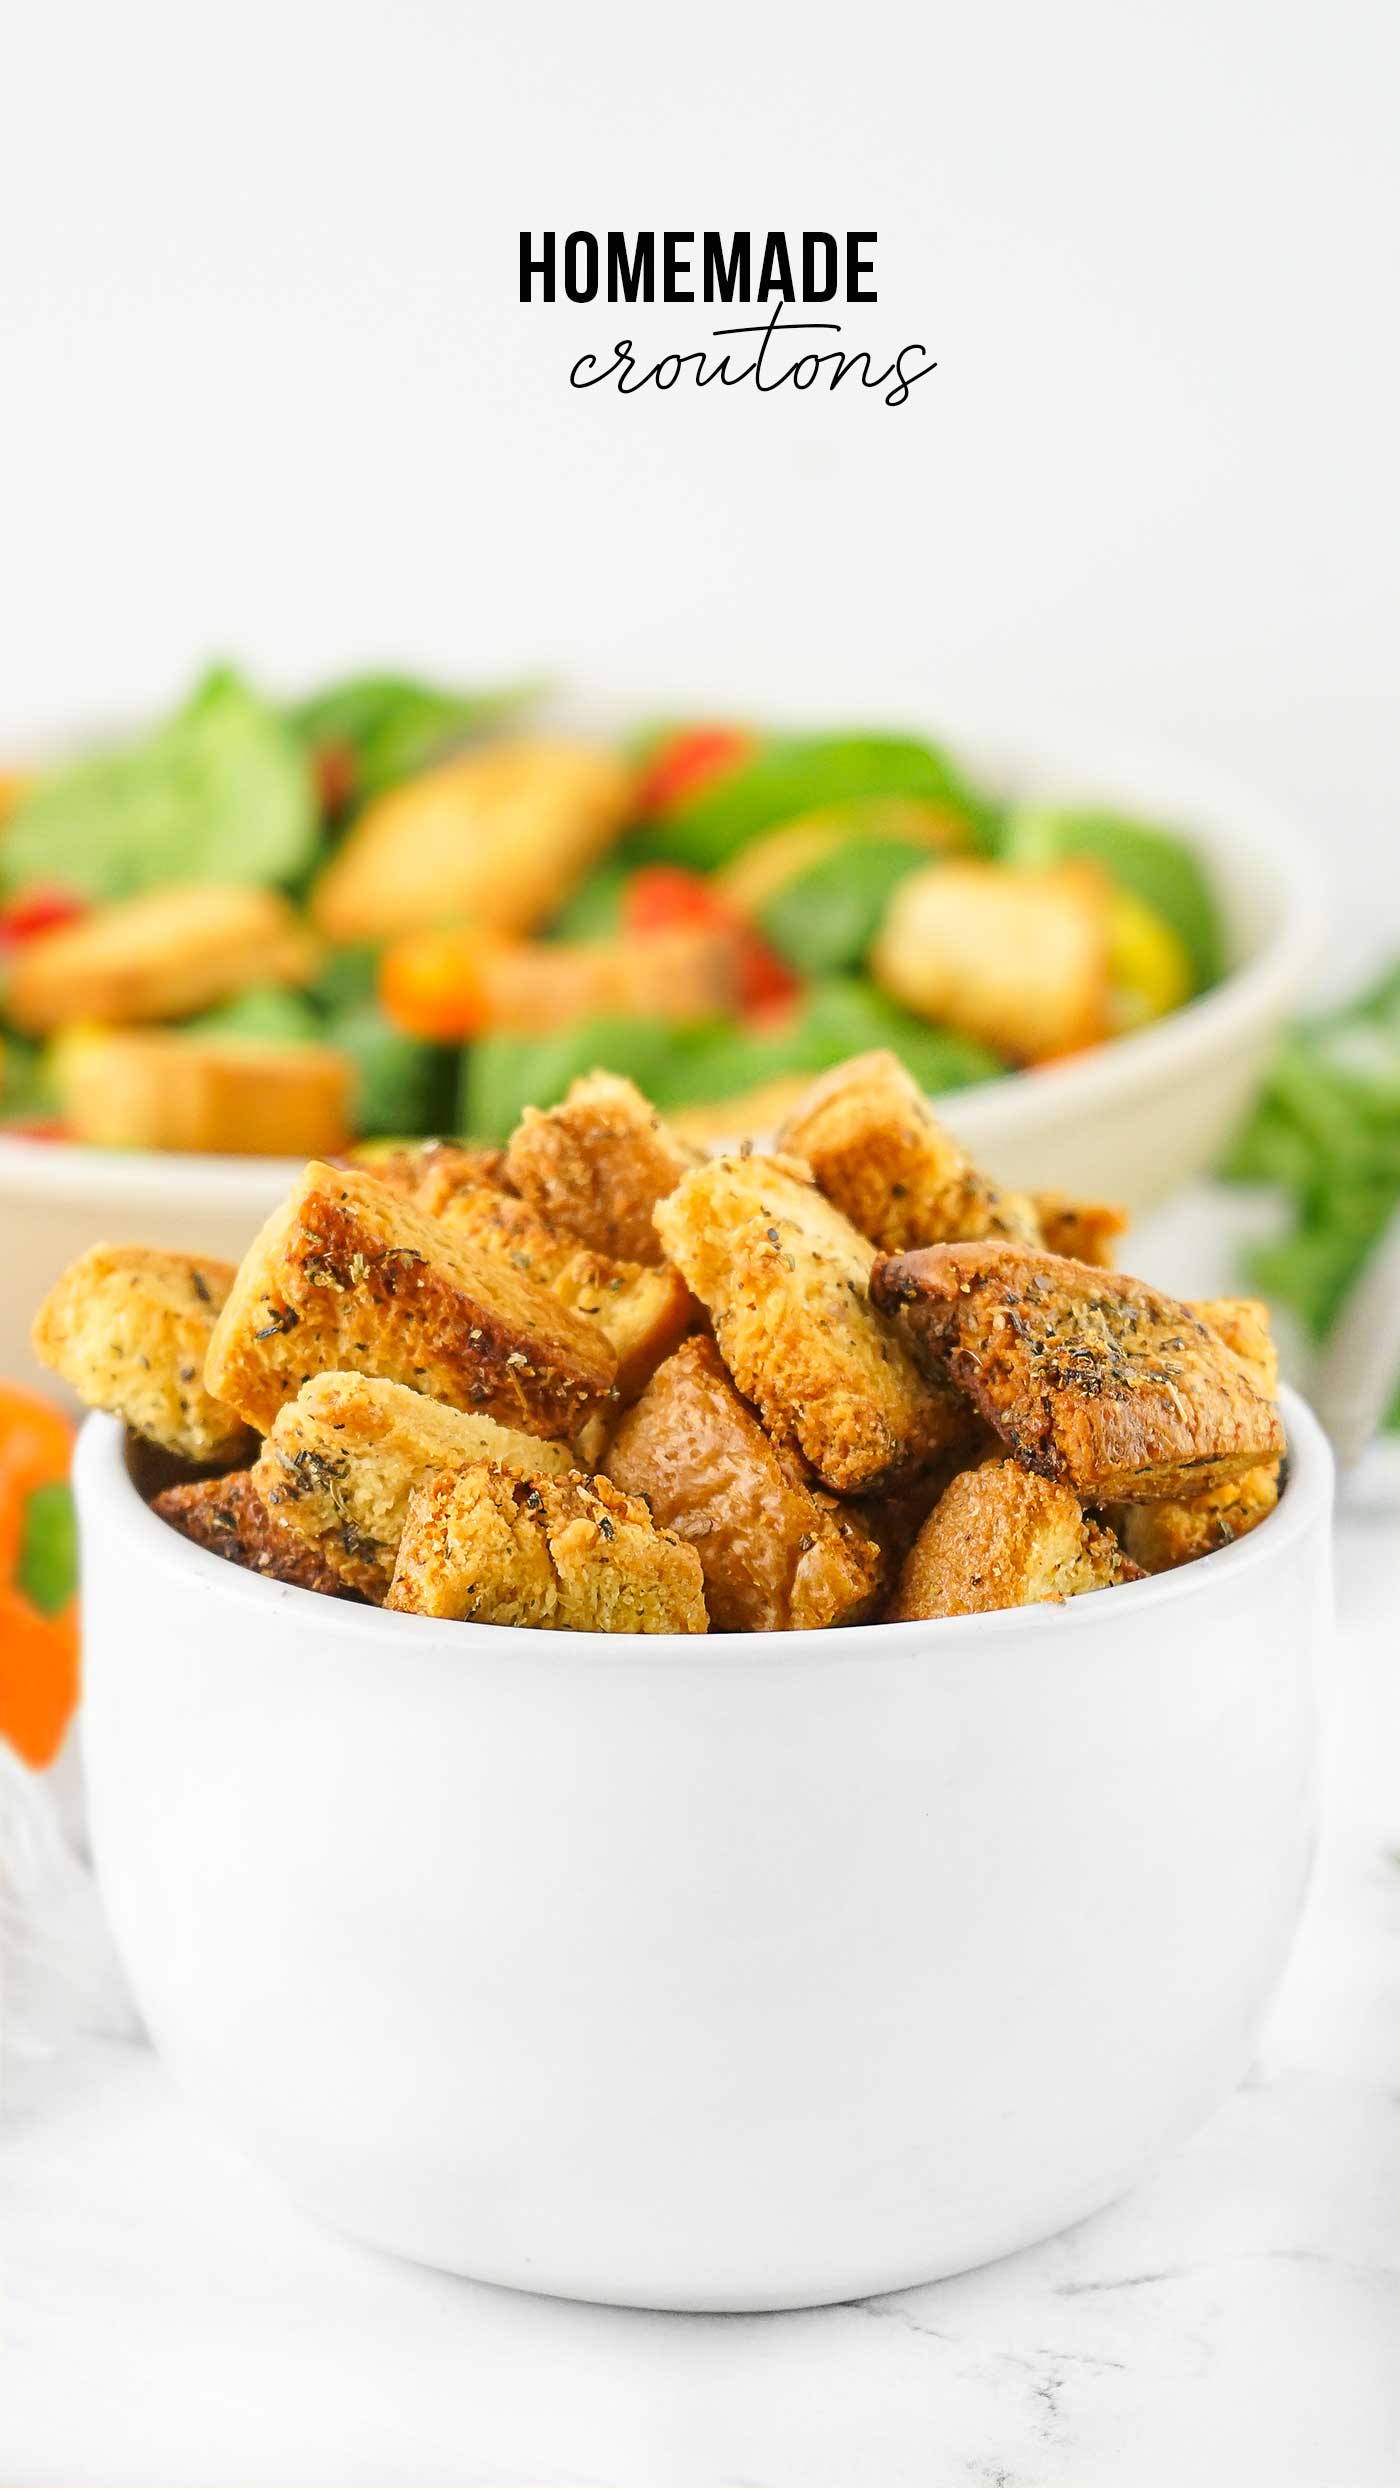 Bowl of Homemade Croutons